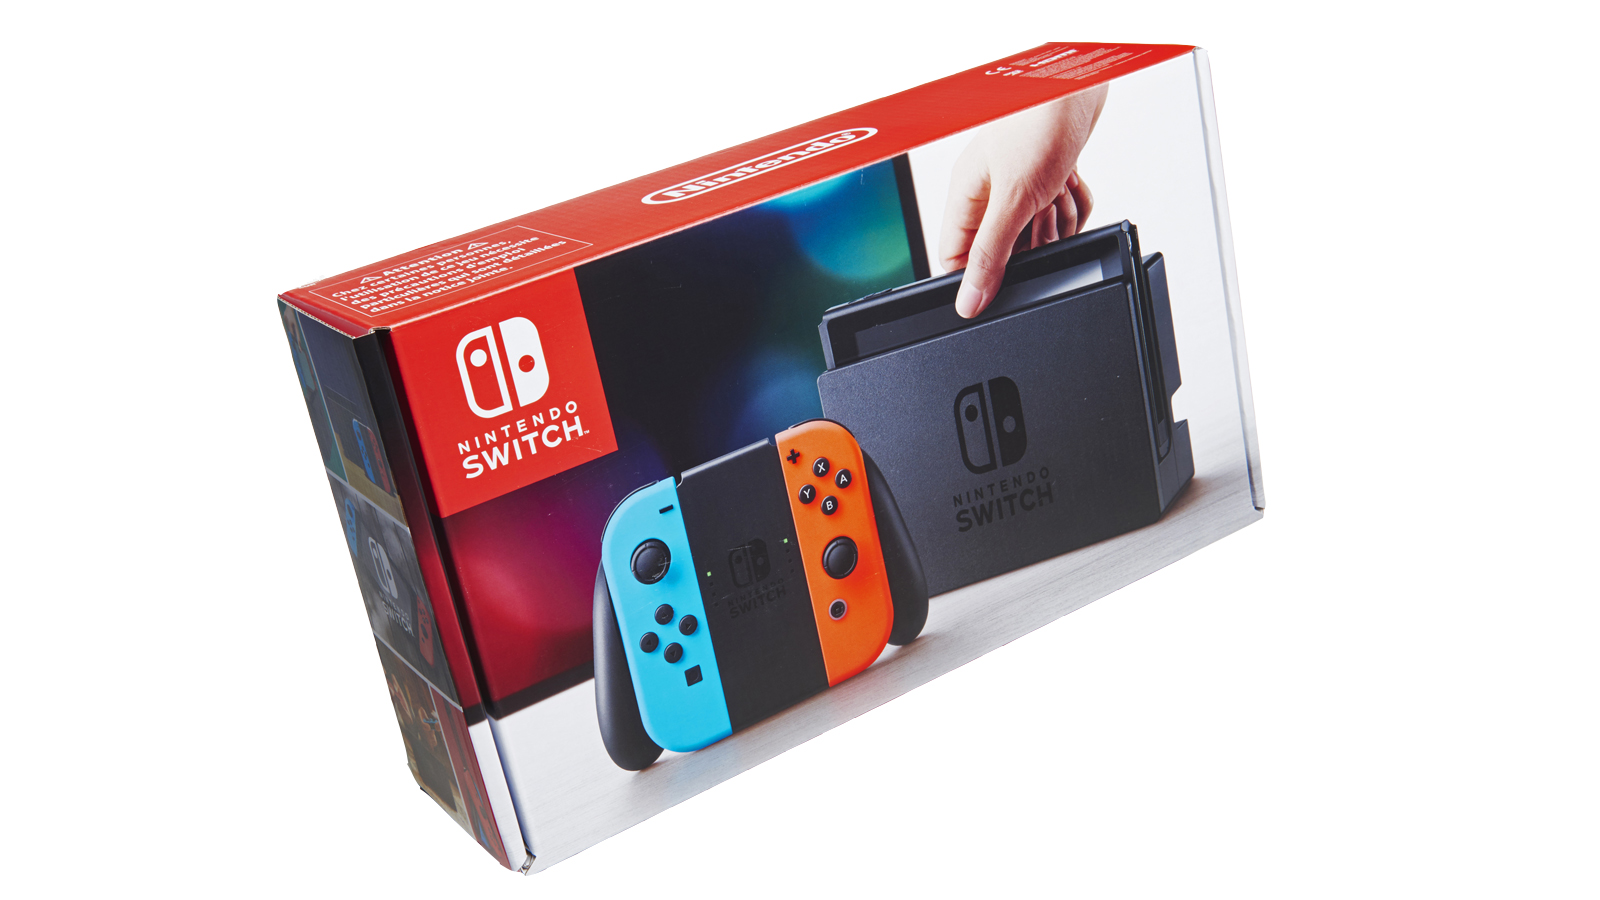 what comes in the box with nintendo switch